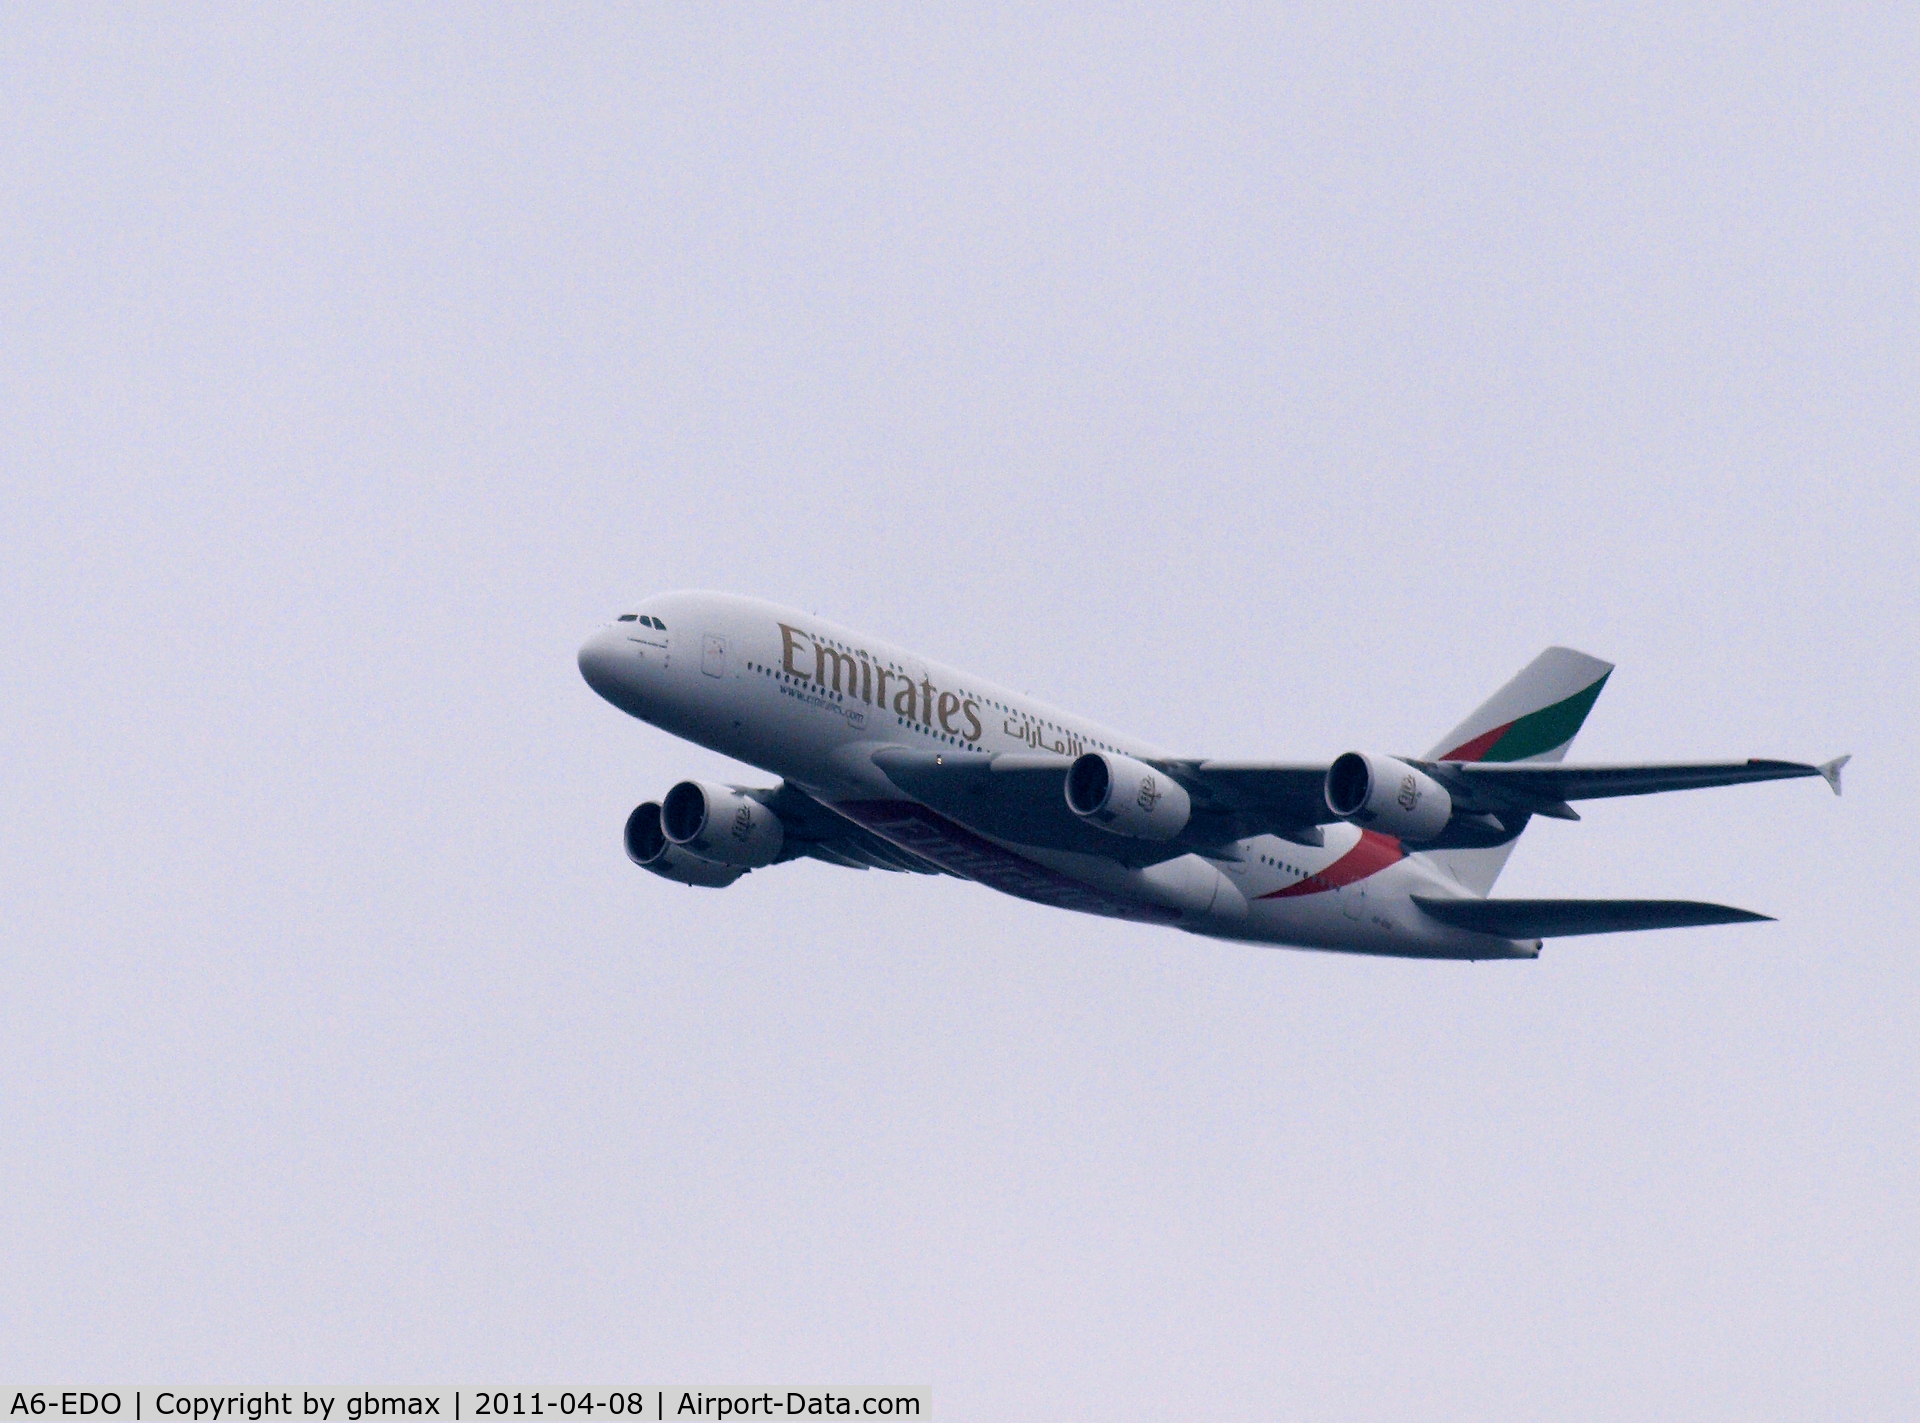 A6-EDO, 2010 Airbus A380-861 C/N 057, Flying over Mineola, NY, going to a landing at JFK